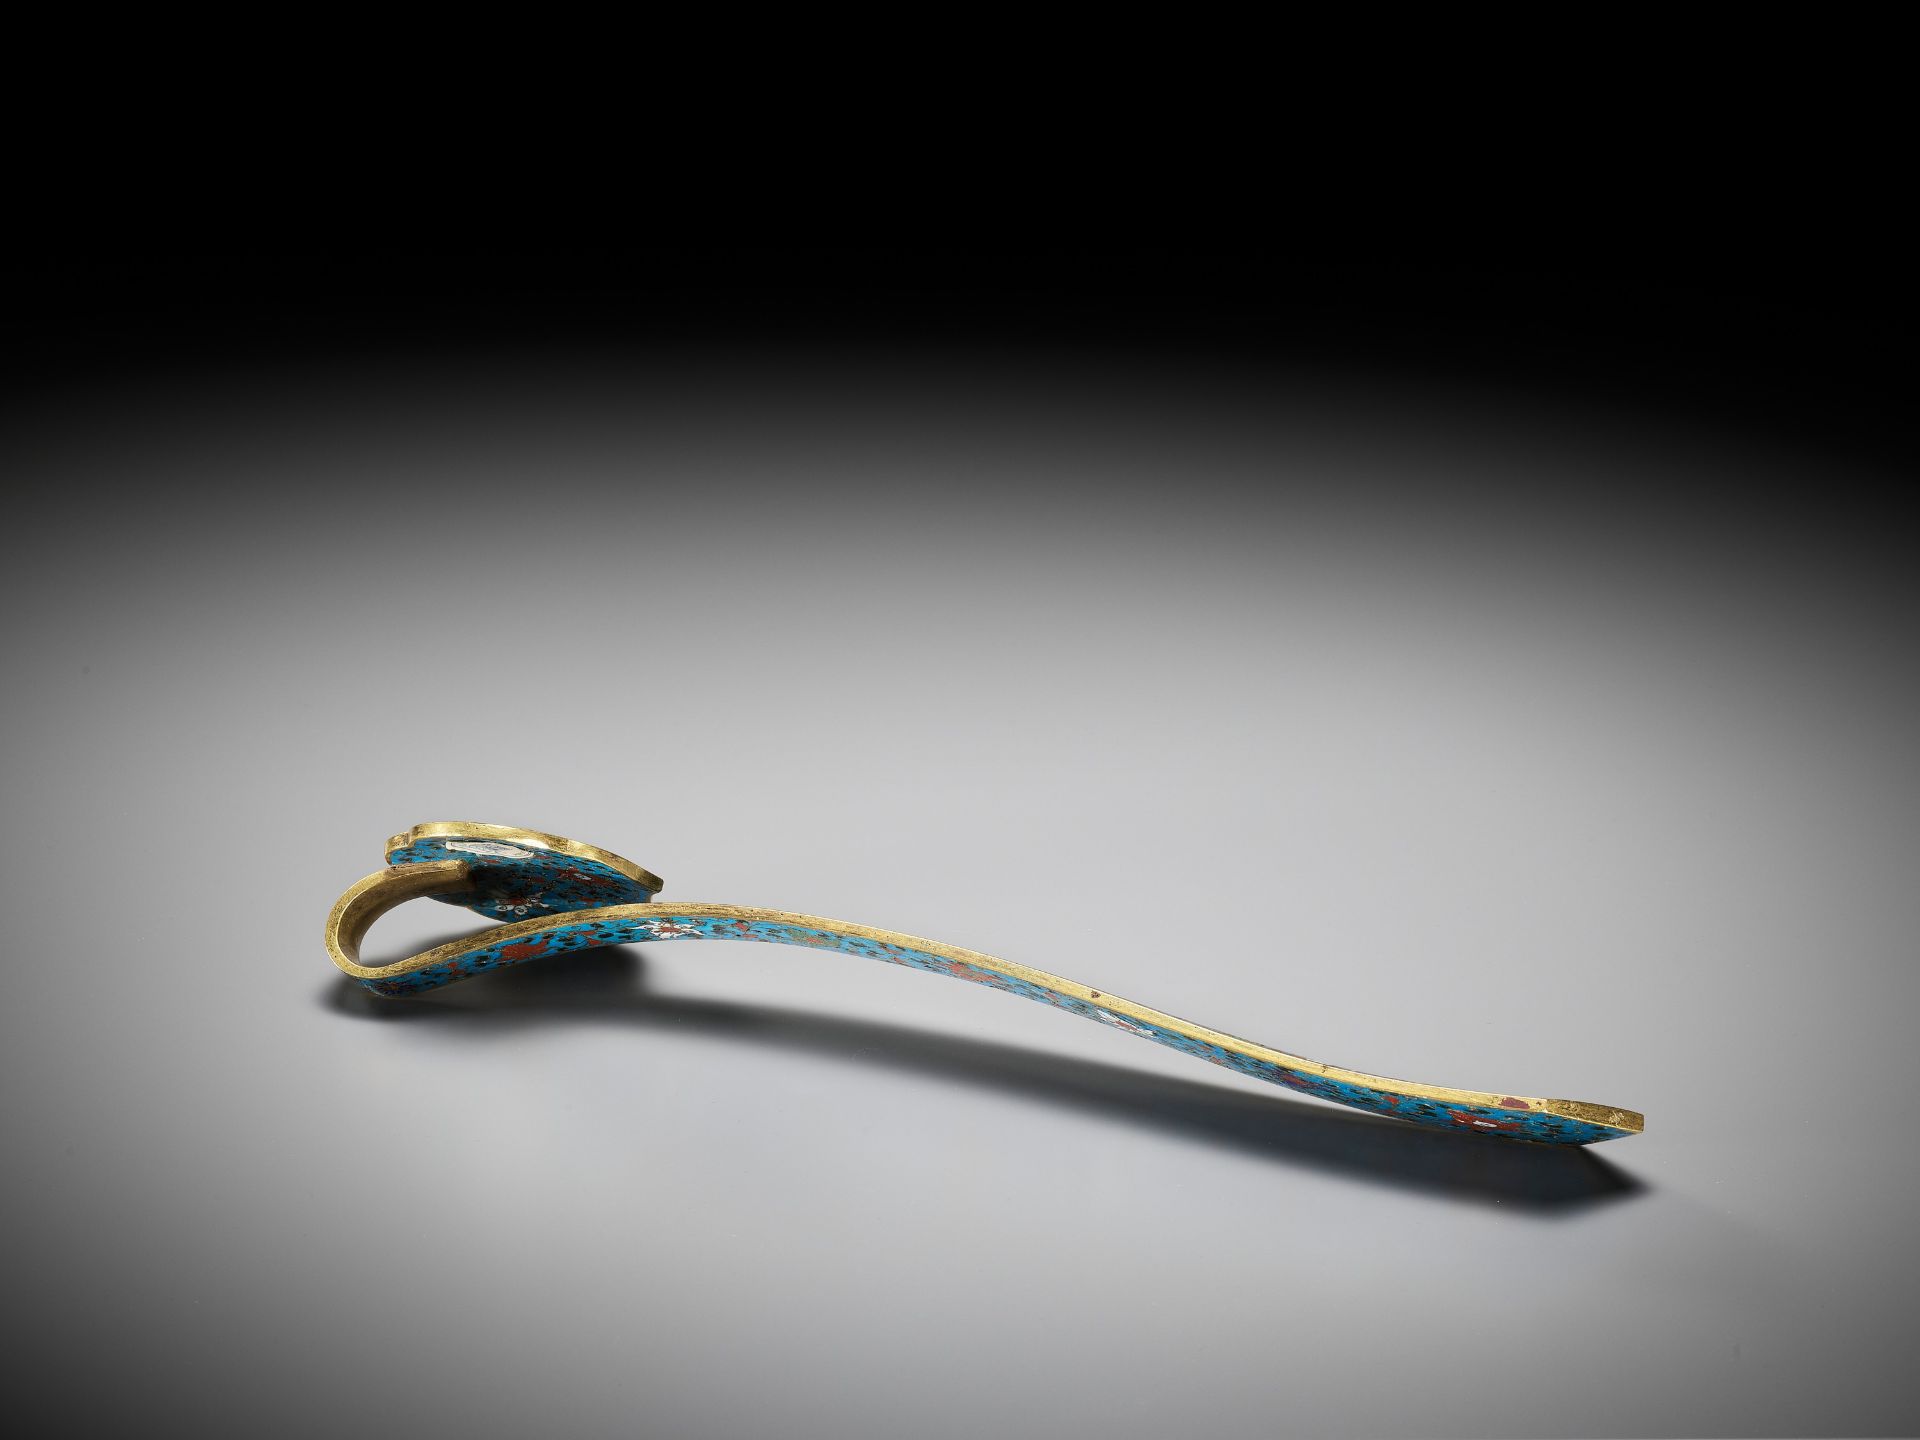 A CLOISONNE ENAMEL RUYI SCEPTER, EARLY QING DYNASTY - Image 15 of 15